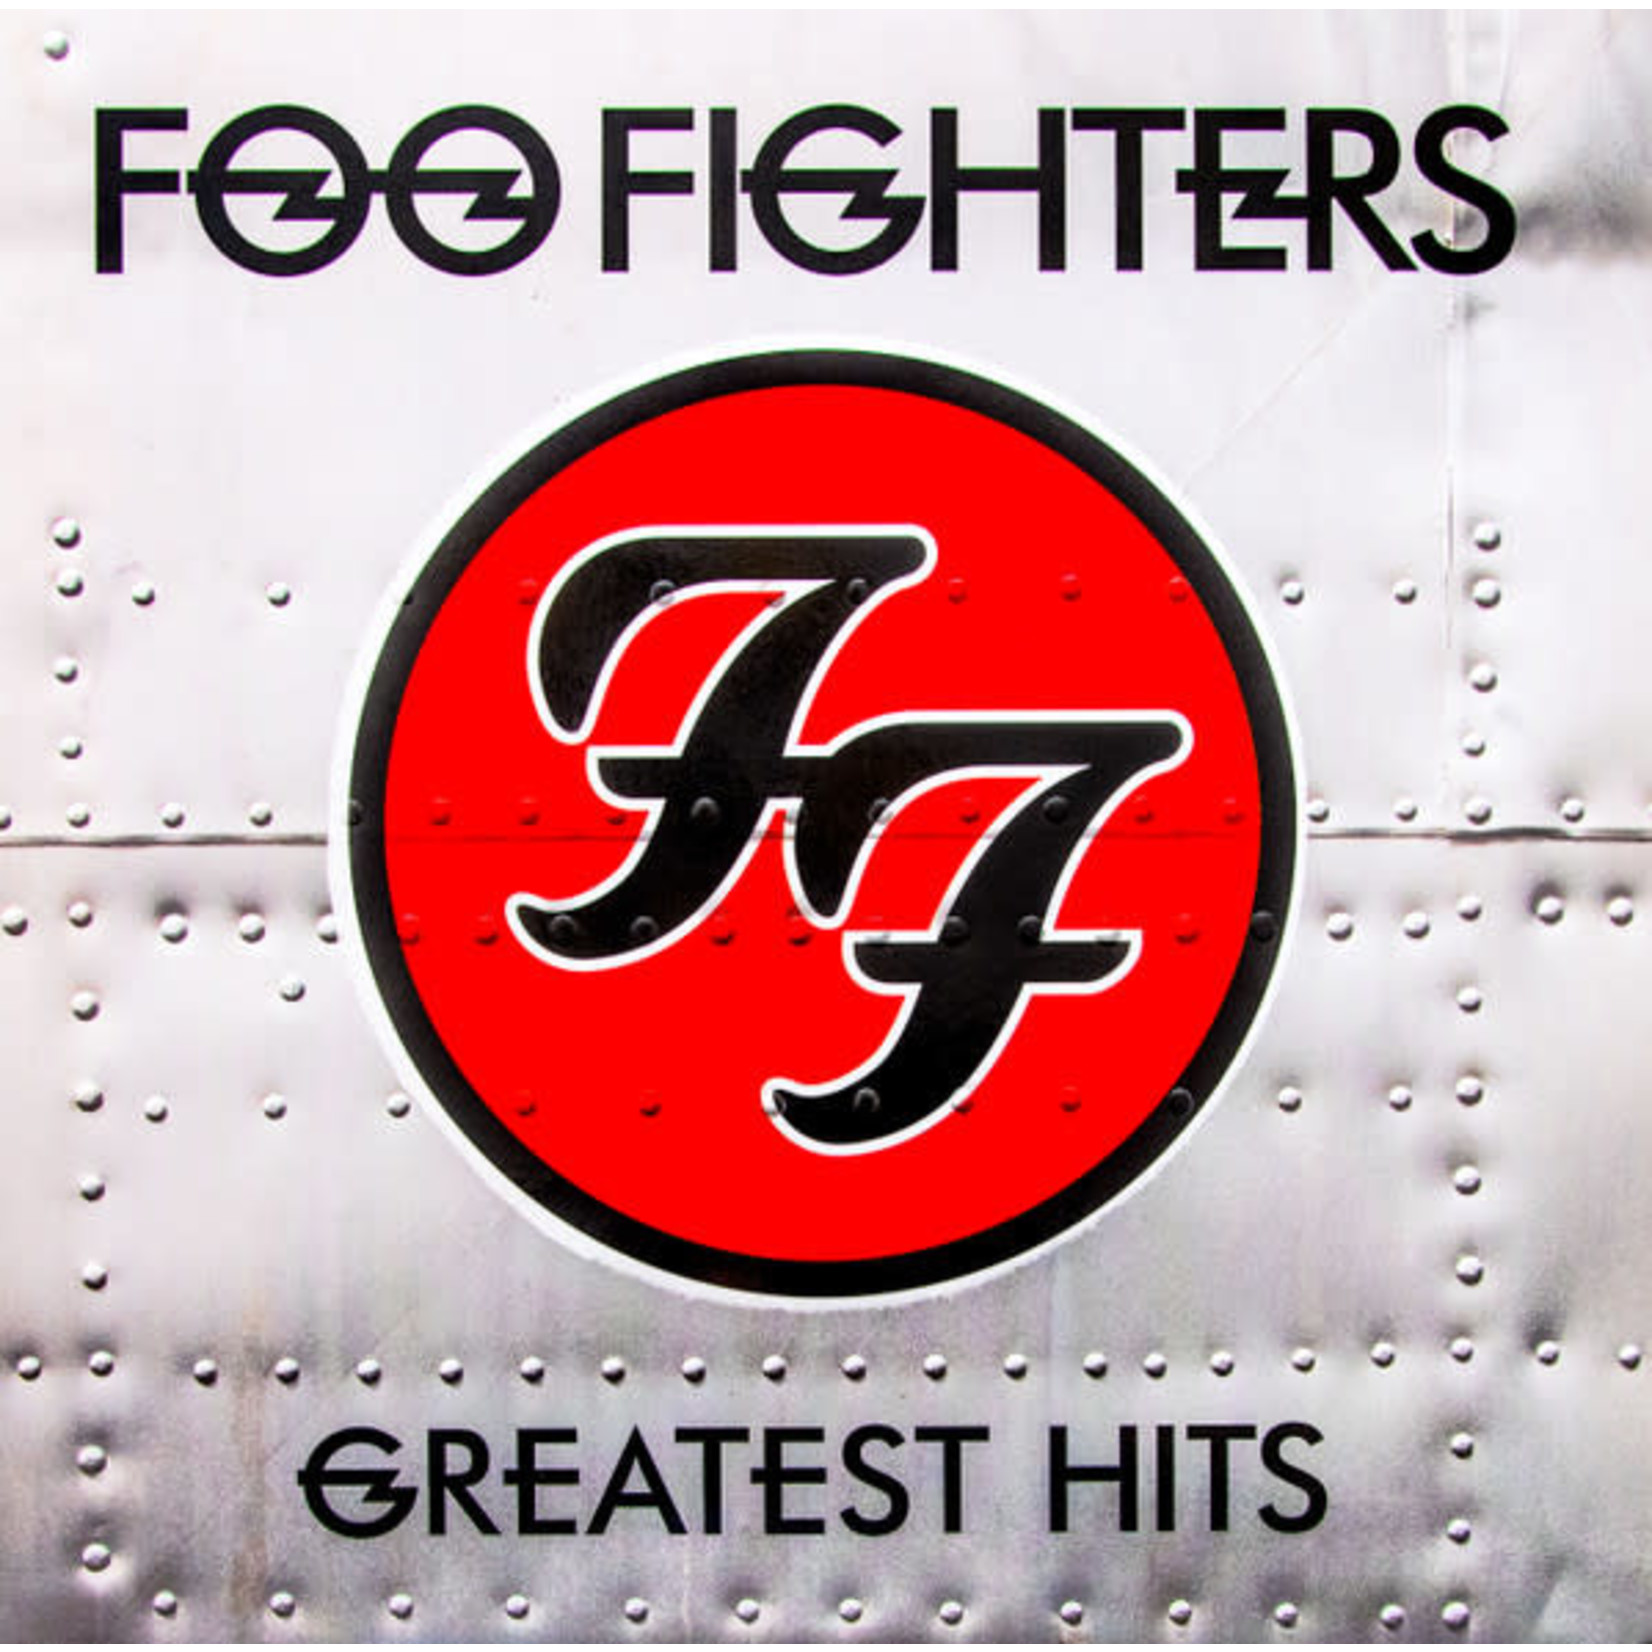 [New] Foo Fighters - Greatest Hits (2LP)